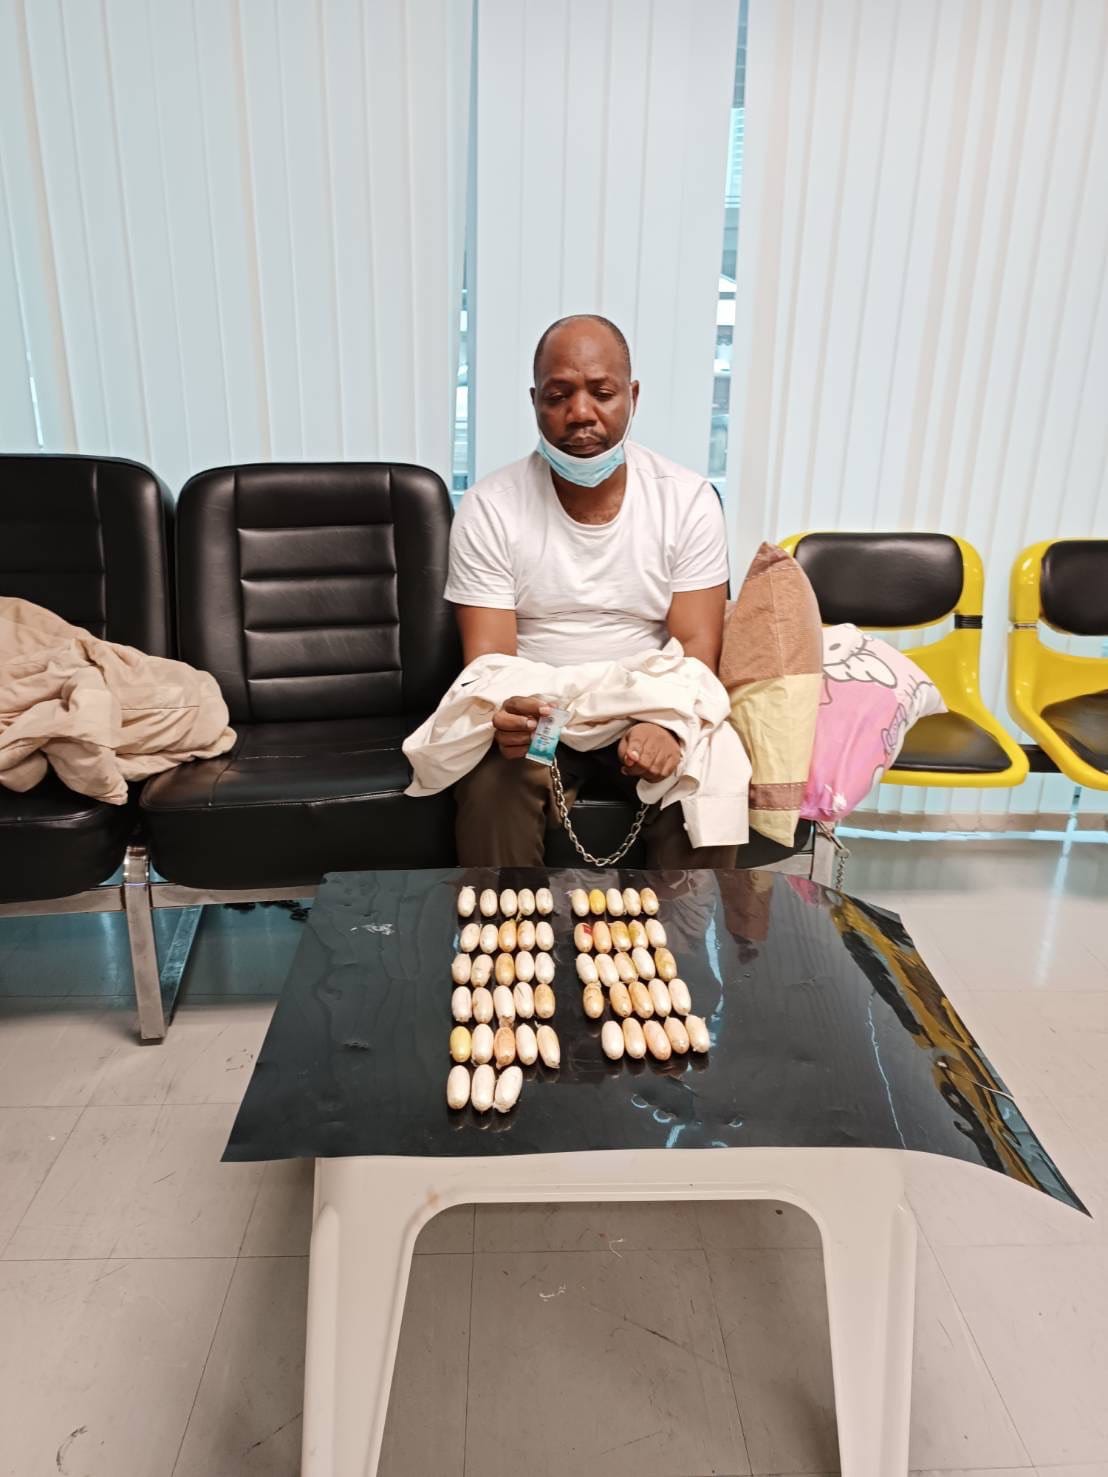 Tanzanian man arrested at Suvarnabhumi airport for allegedly smuggling 53 cocaine packages in his abdomen